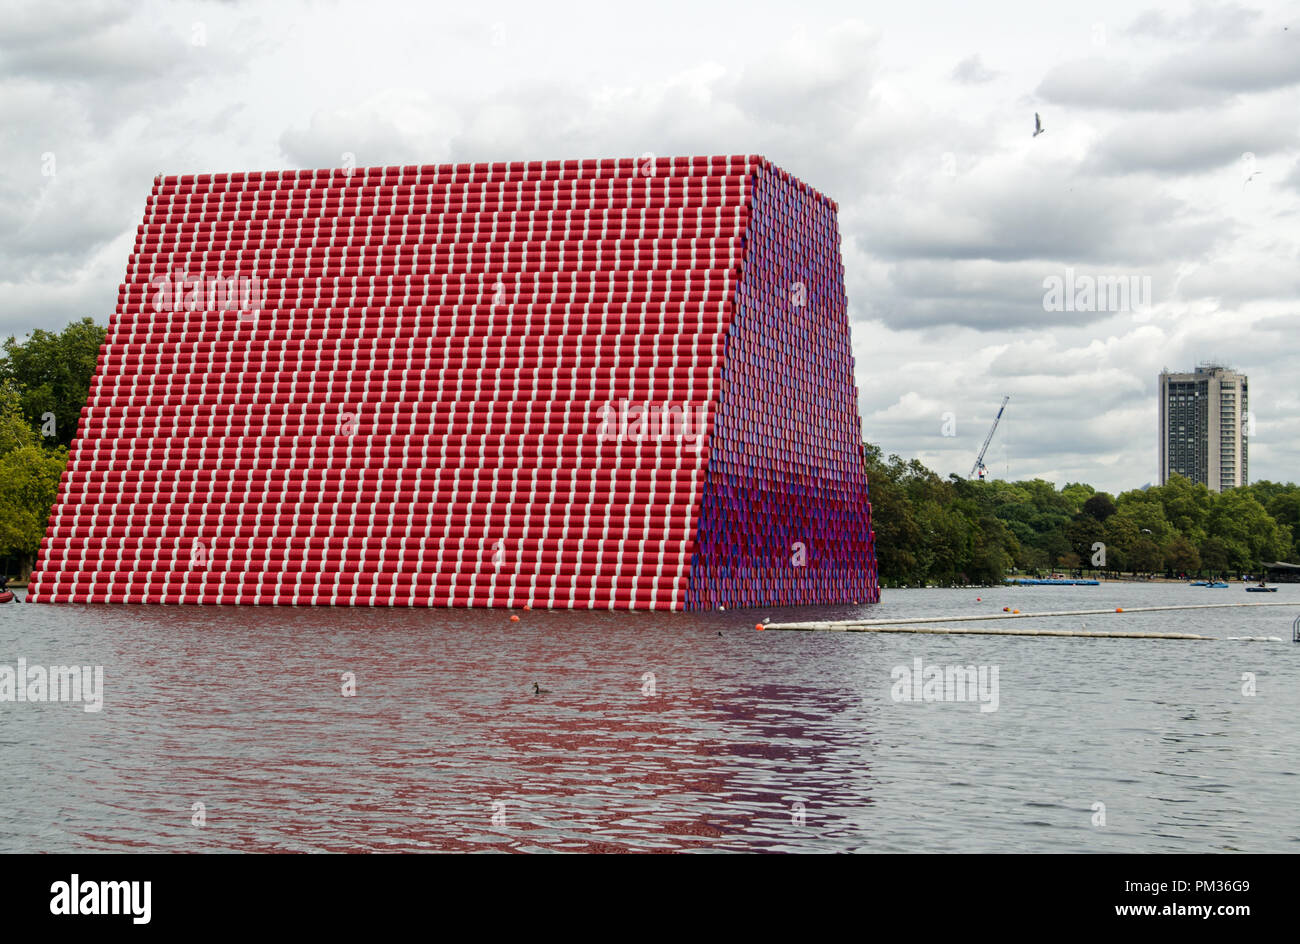 LONDON, UK - SEPTEMBER 14, 2018: Side view of The London Mastaba by Christo and Jeanne-Claude on display for three months over the summer in Hyde Park Stock Photo